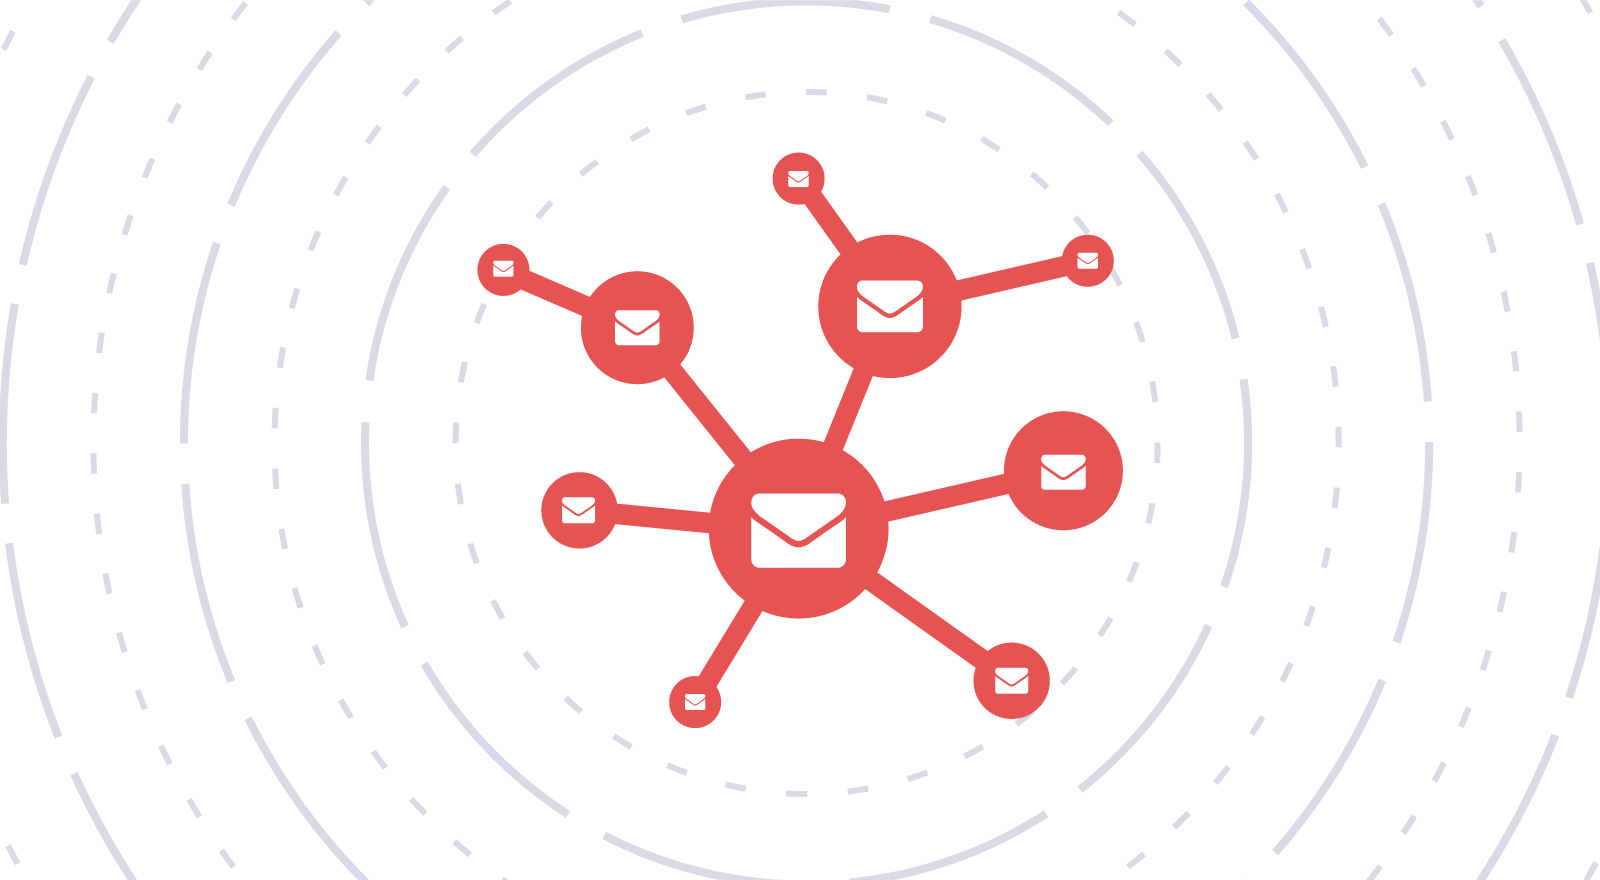 Connected email tracks